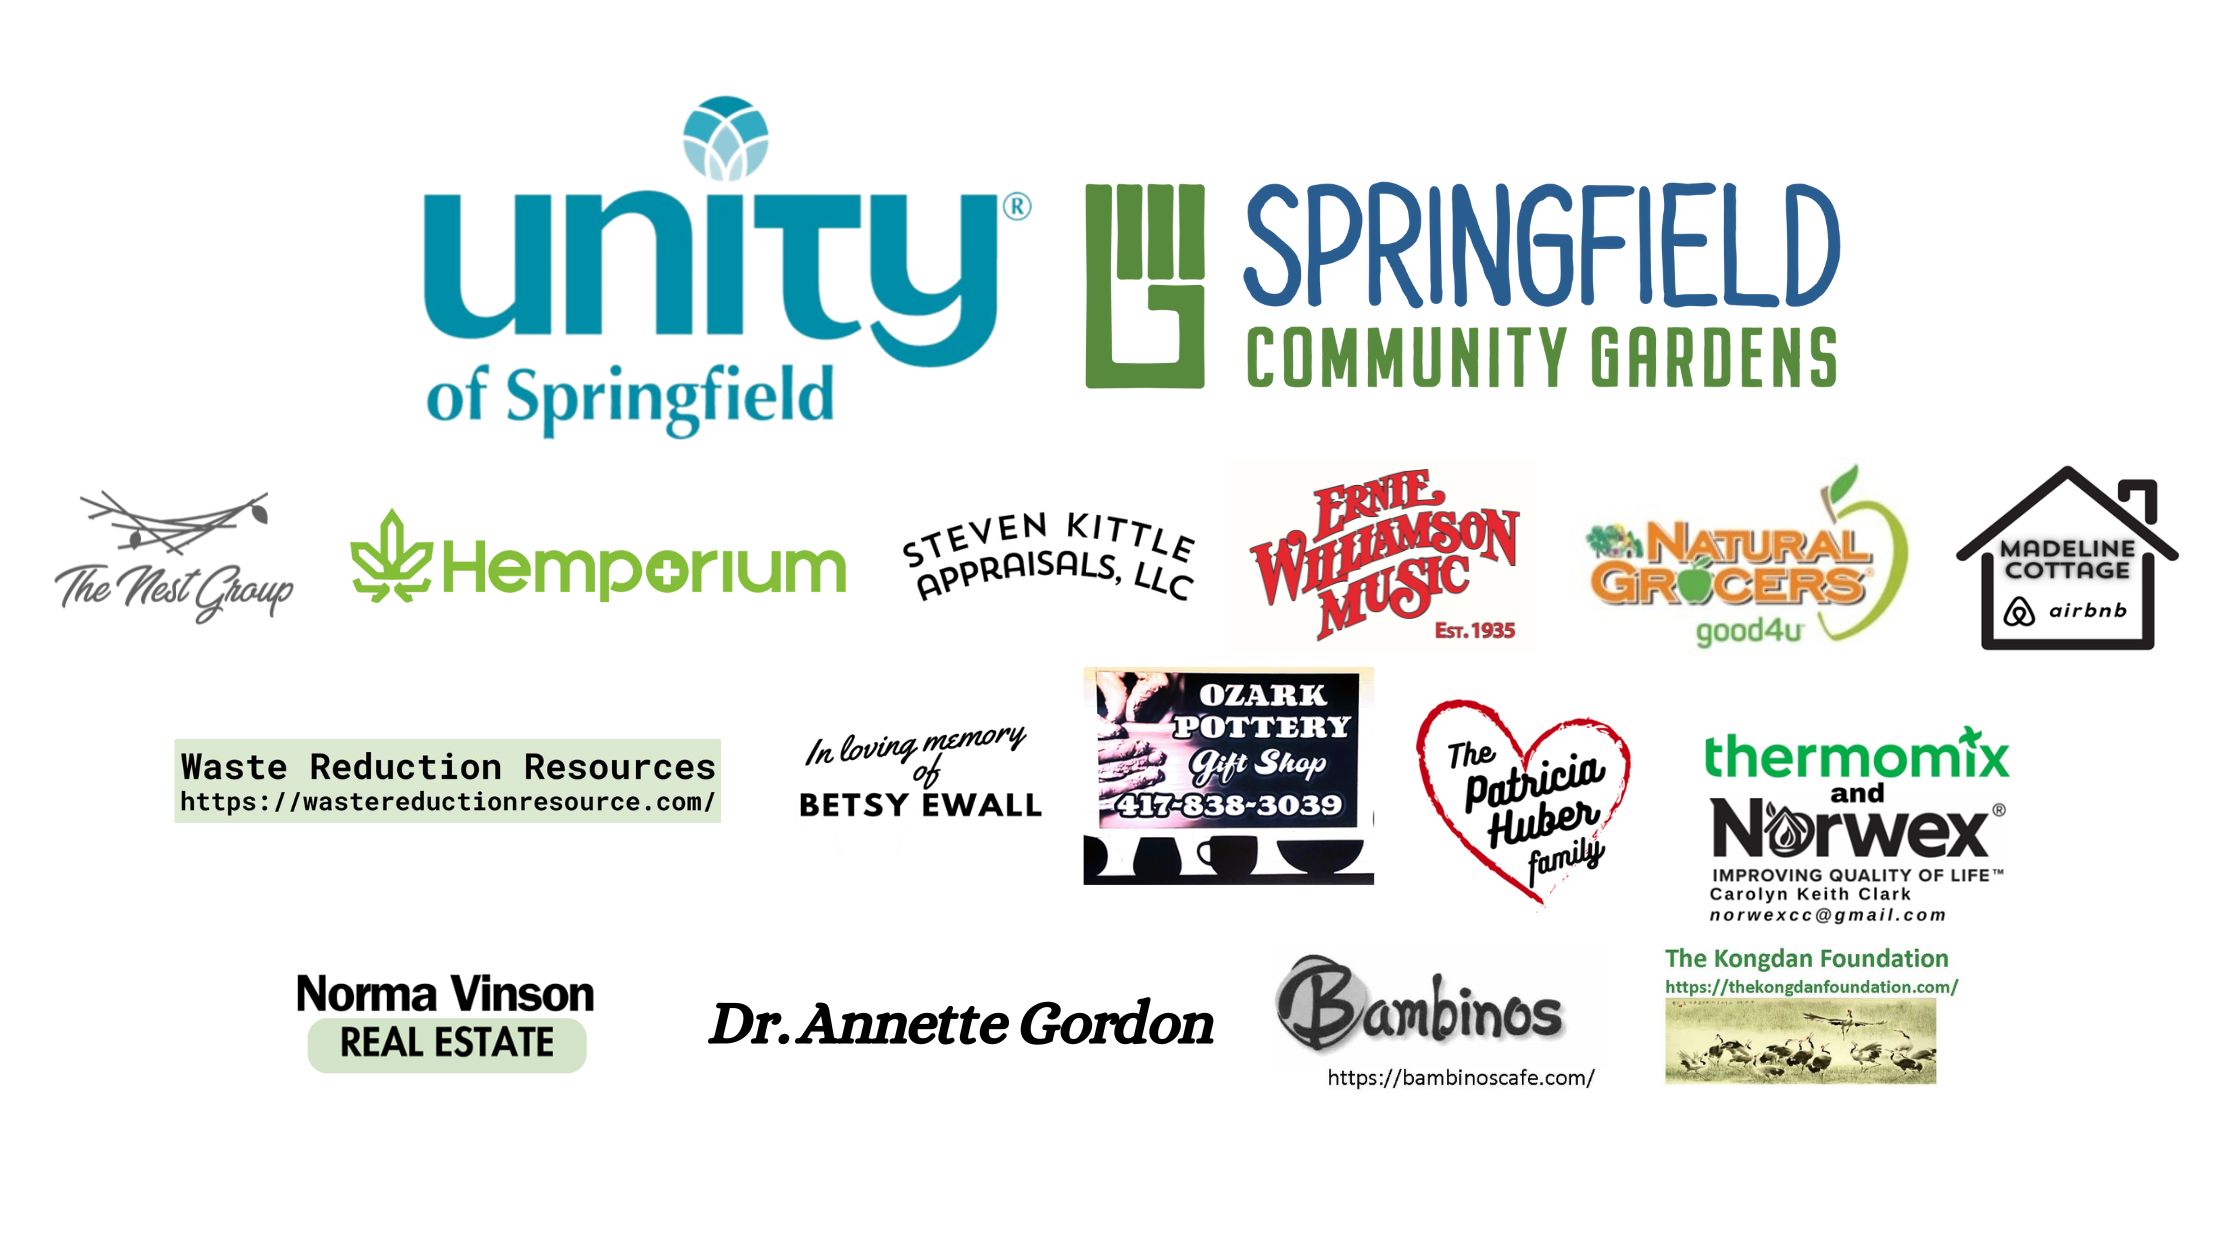 Sponsors logos "Unity of Springfield," "Springfield Community Gardens," "The Nest Group," Steve Kittle Appraisals," "Ernie Williamson Music," "Natural Grocers," "Madeline Cottage," "Waste Reduction Resources, " "In Memory of Betsy Ewall," "The Patricia Huber Family," "Thermomix & Norwex," "Norma Vinson Real Estate," "Dr. Annette Gordon," "Bambinos," and "The Kogdan Group."